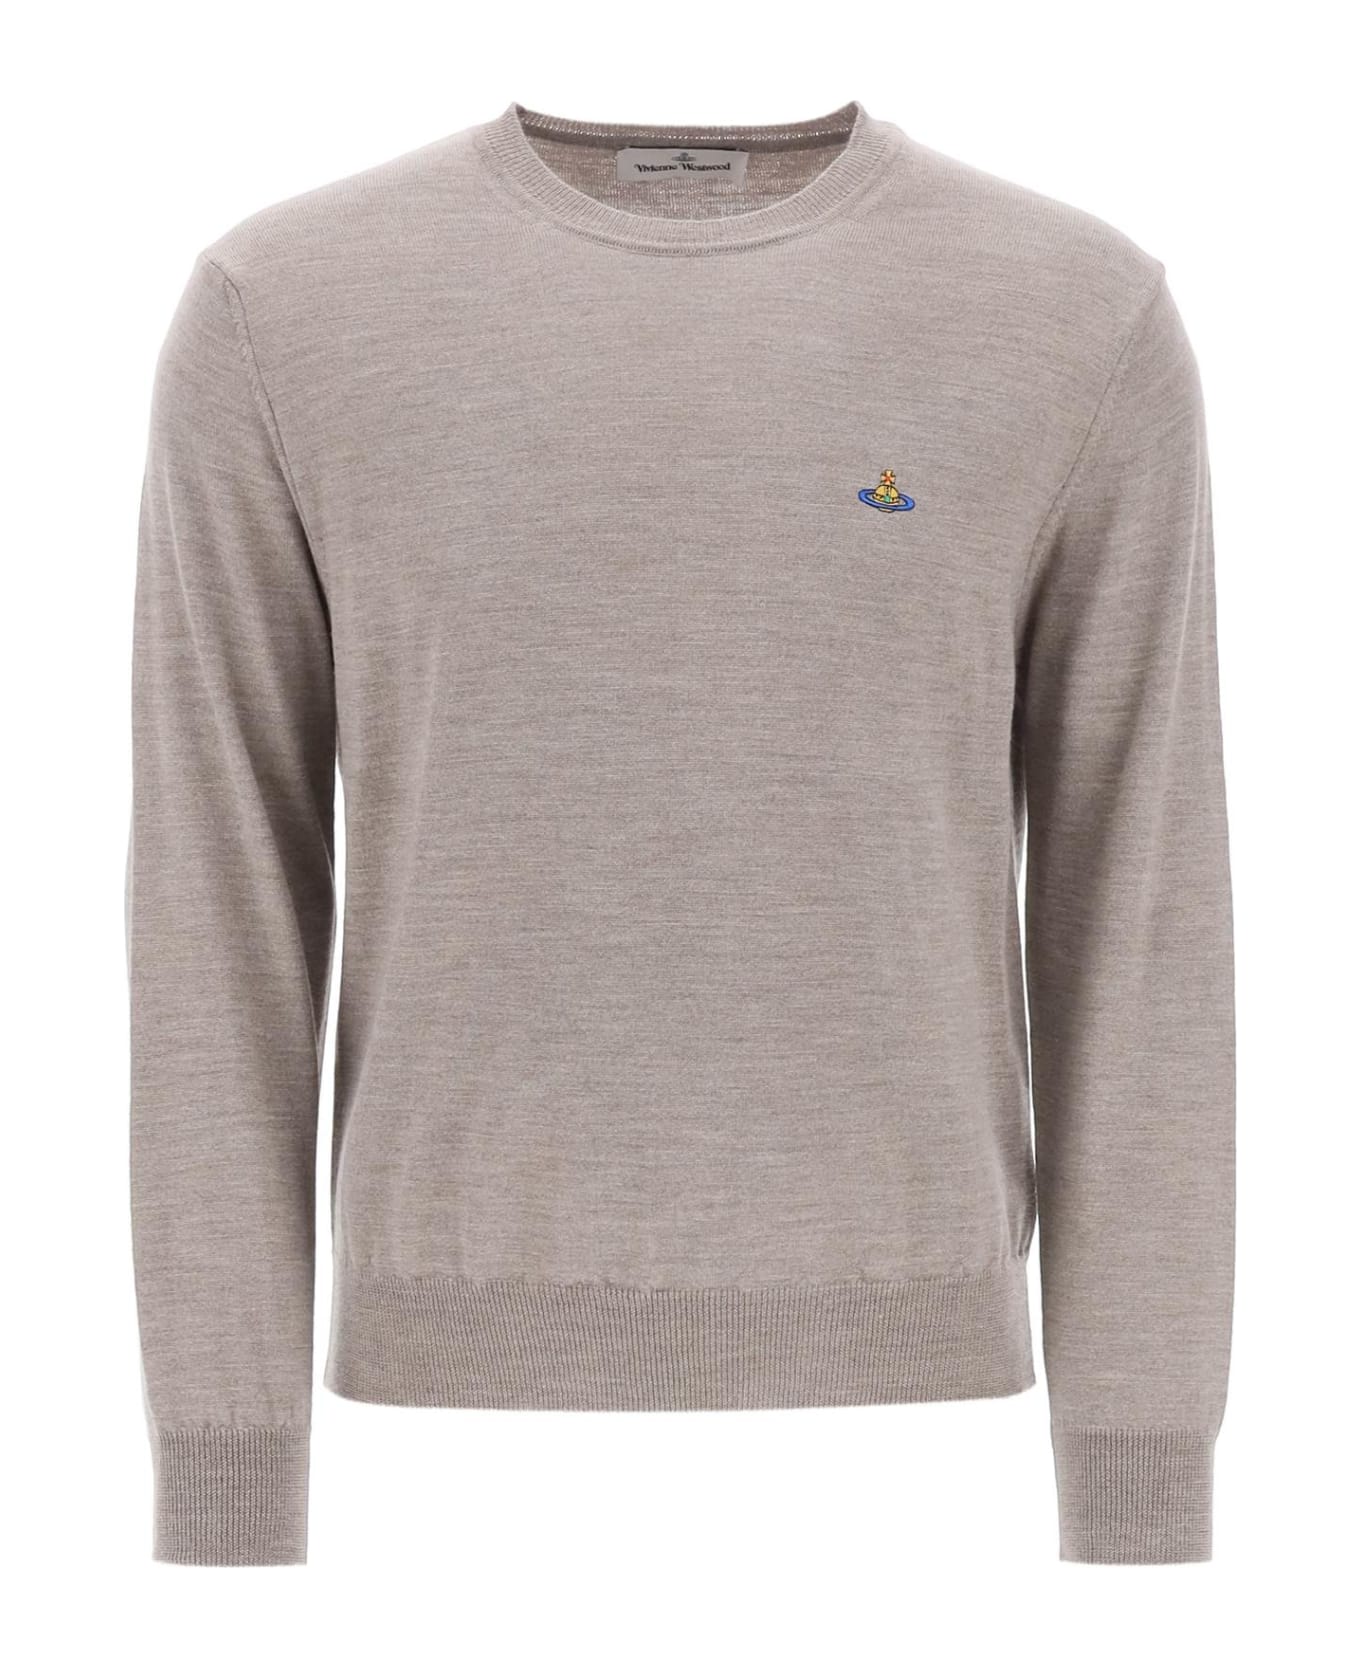 Vivienne Westwood Orb-embroidered Crew-neck Sweater - GREY